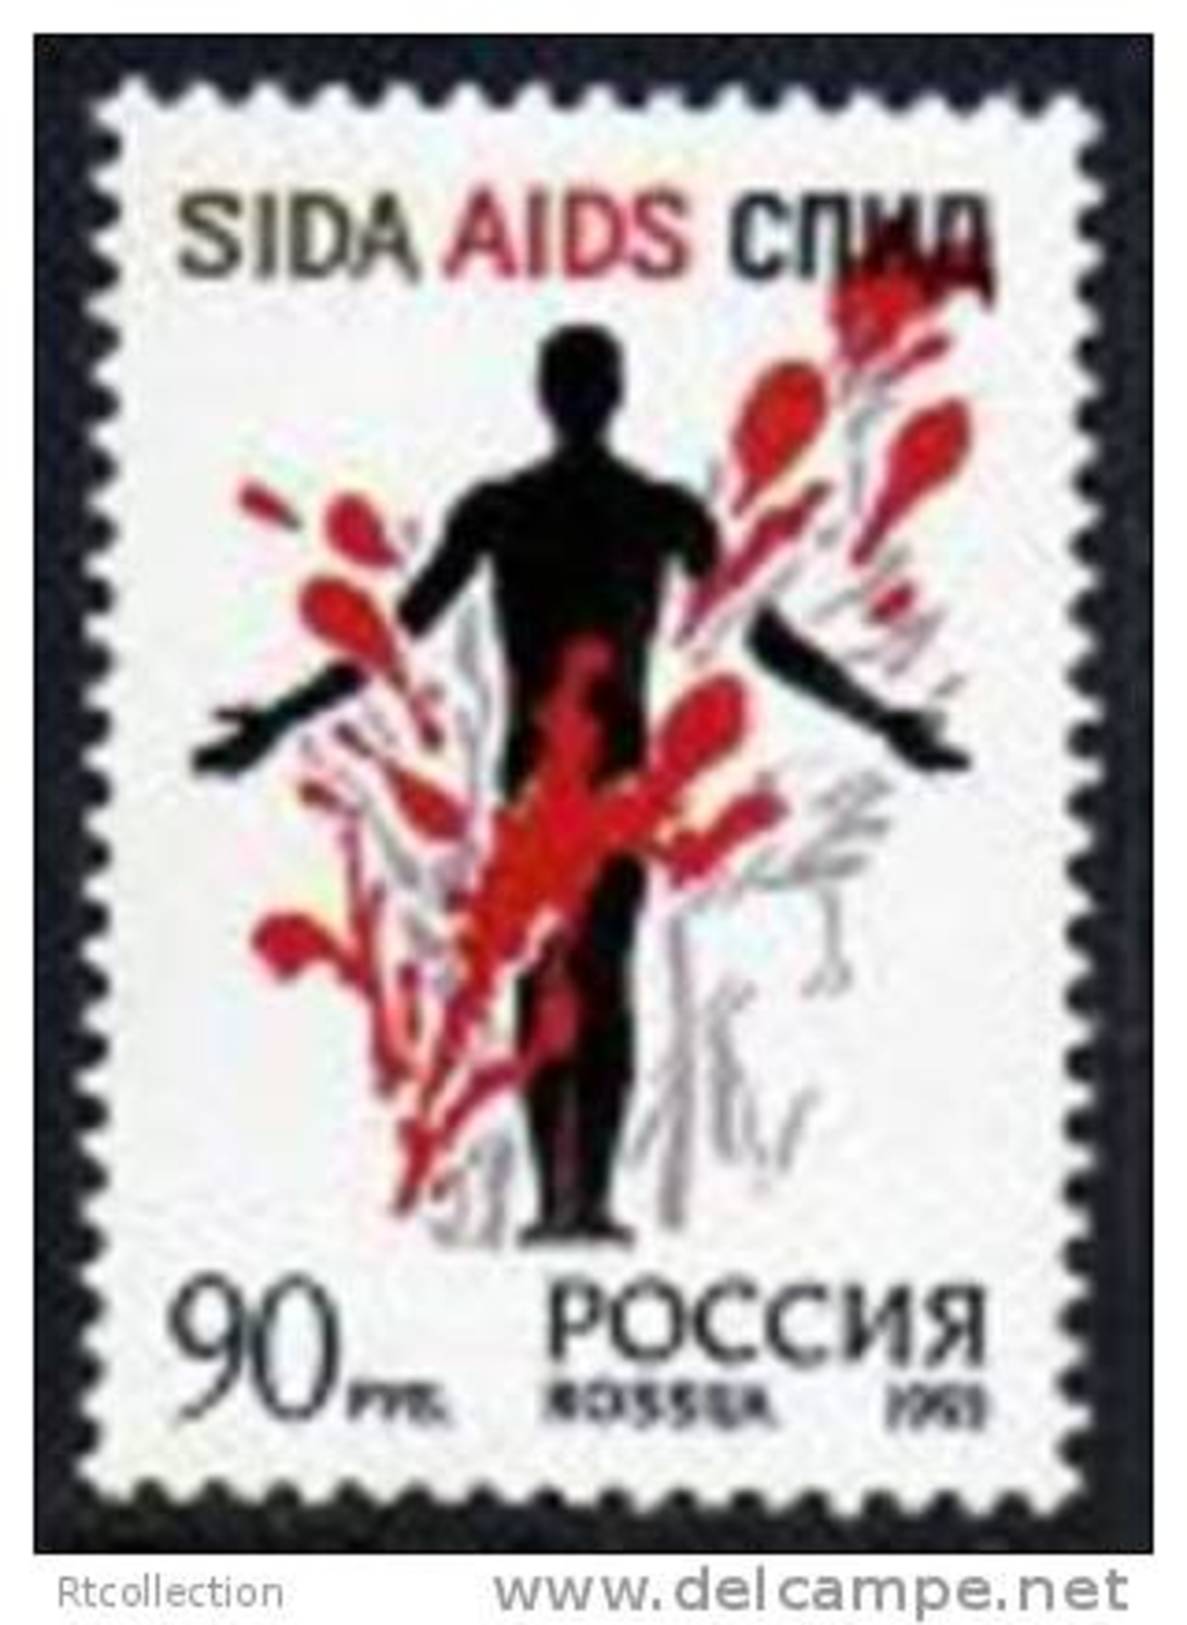 USSR Russia 1993 - One Health Prevention Of  AIDS / Fight Against Aids Blood Disease Stamp MNH Michel 347 Russia 6183 - Sammlungen